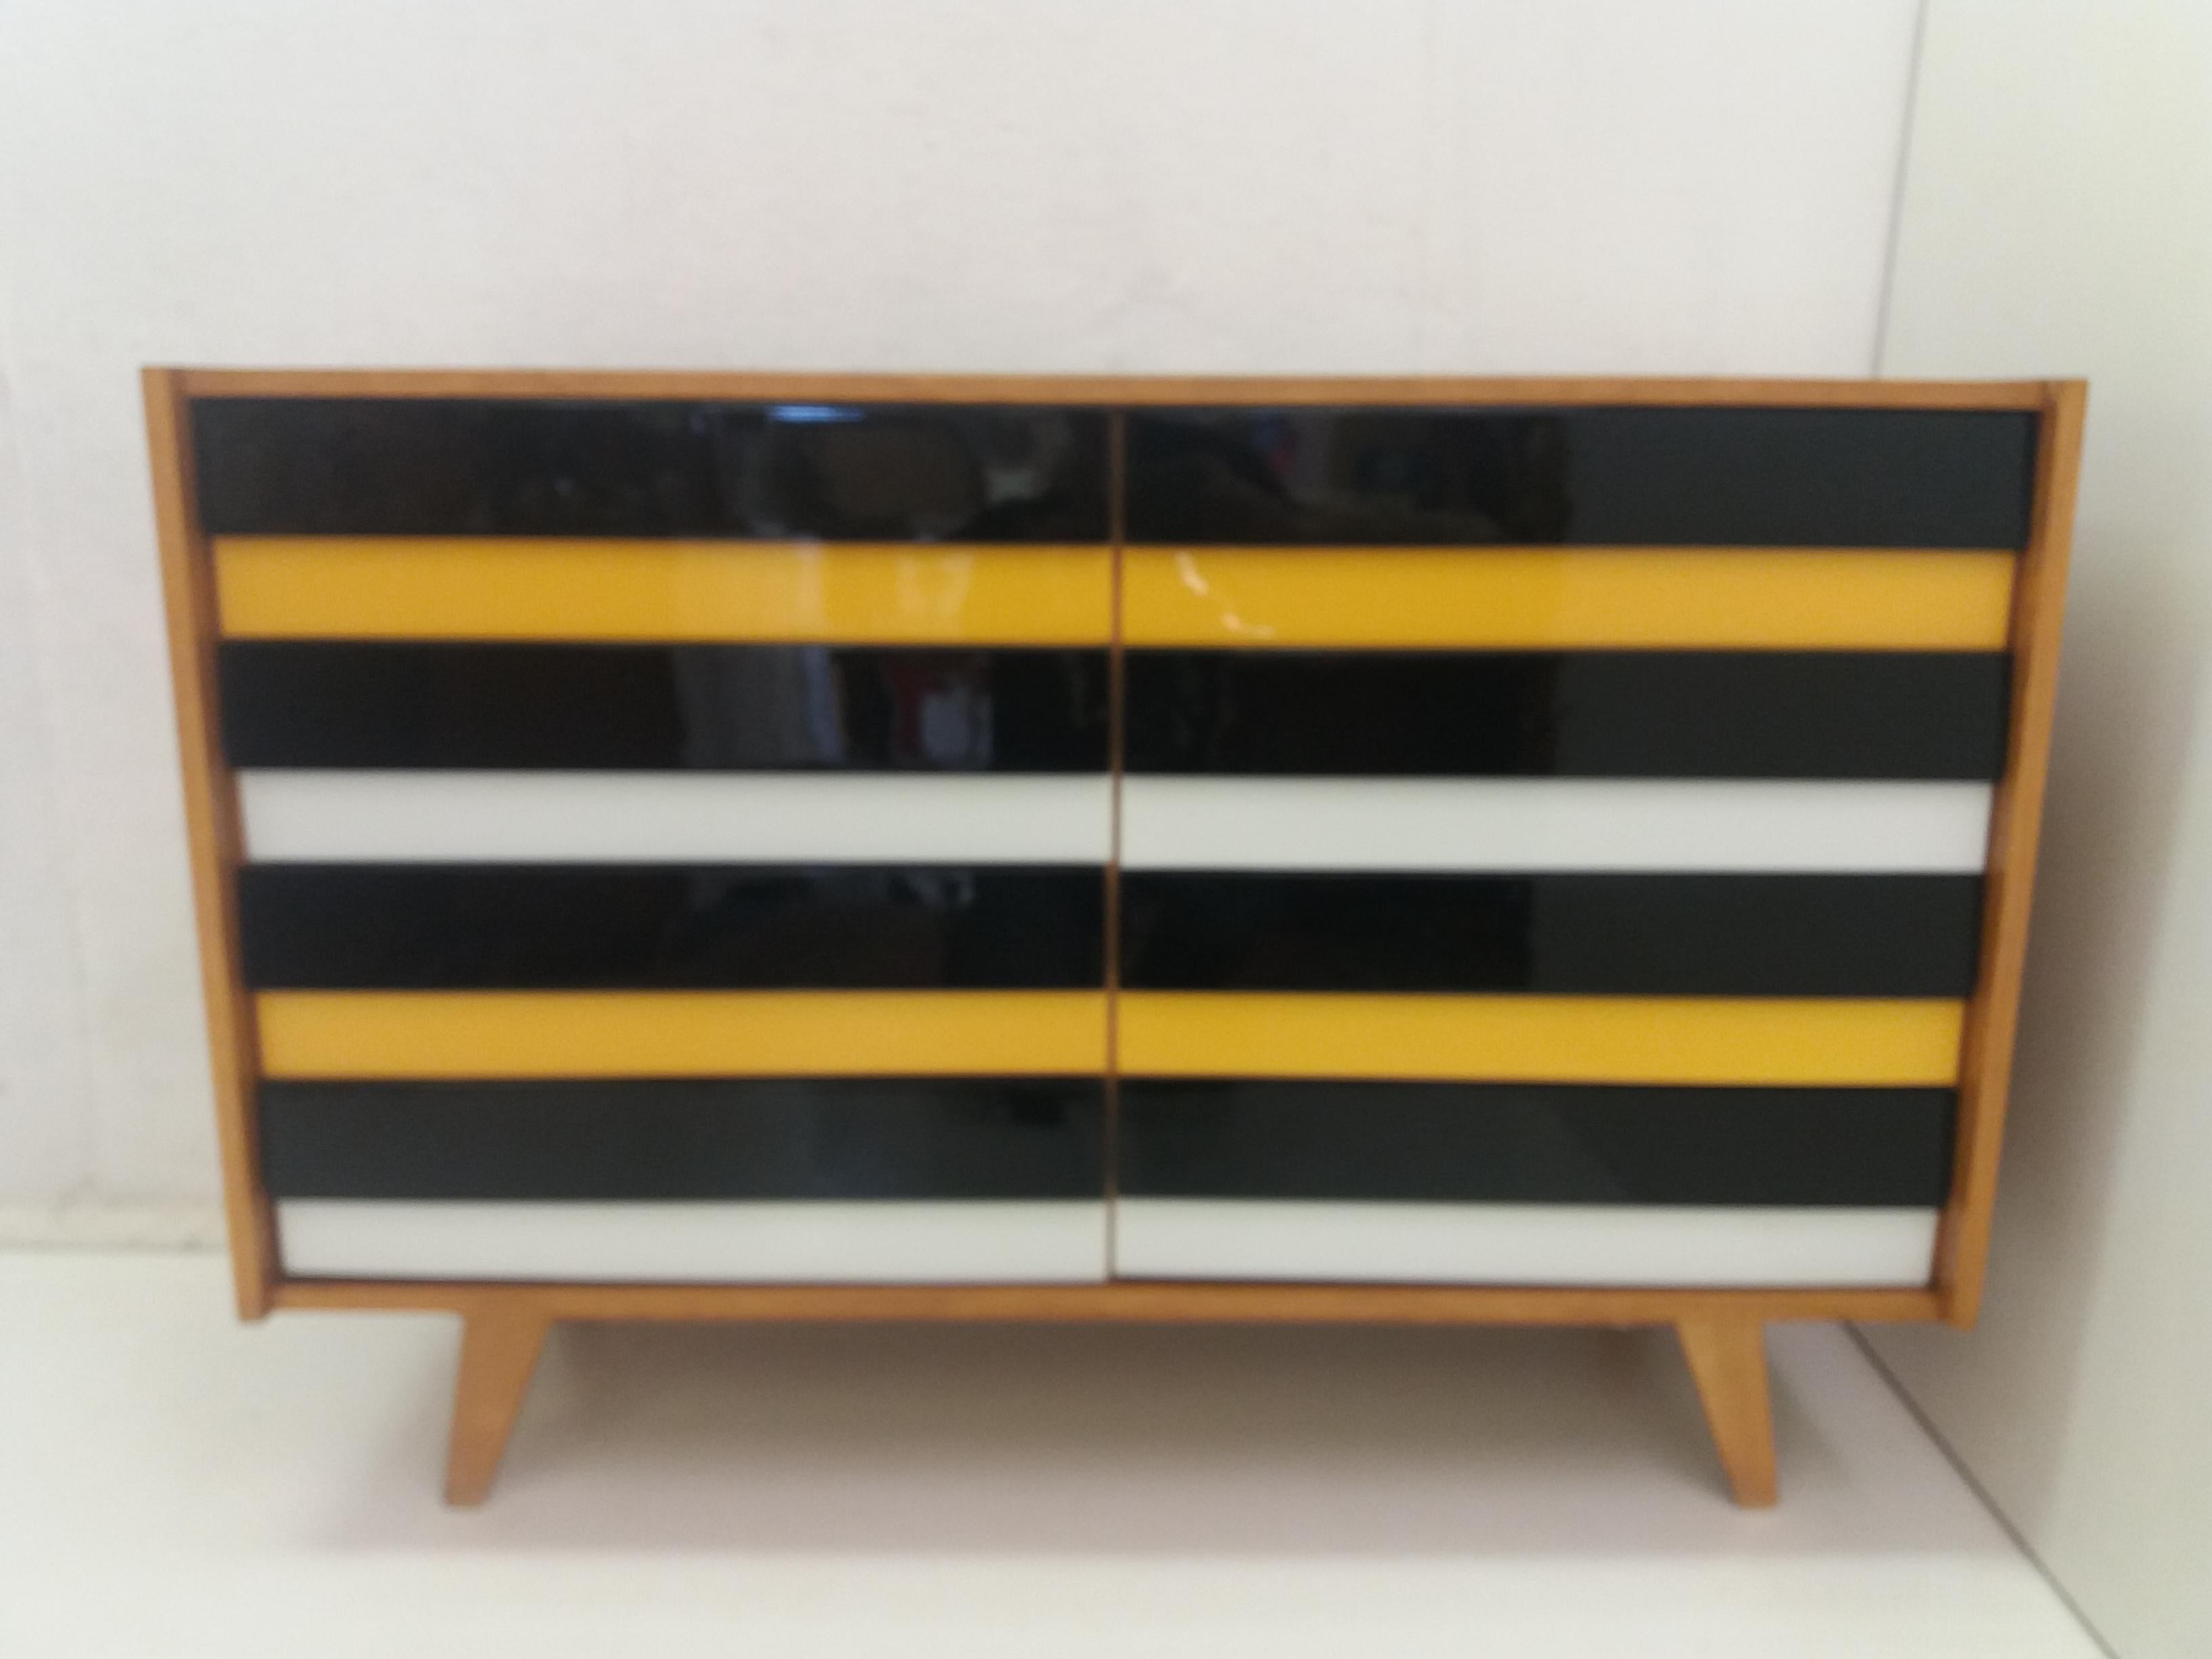 - made in Czechoslovakia
- made of oak wood, plastic
- maker: Interier Praha
- plastic eight drawers
- drawers has been carefully refurbished 
- drawers lacquered in high gloss
- good condition.